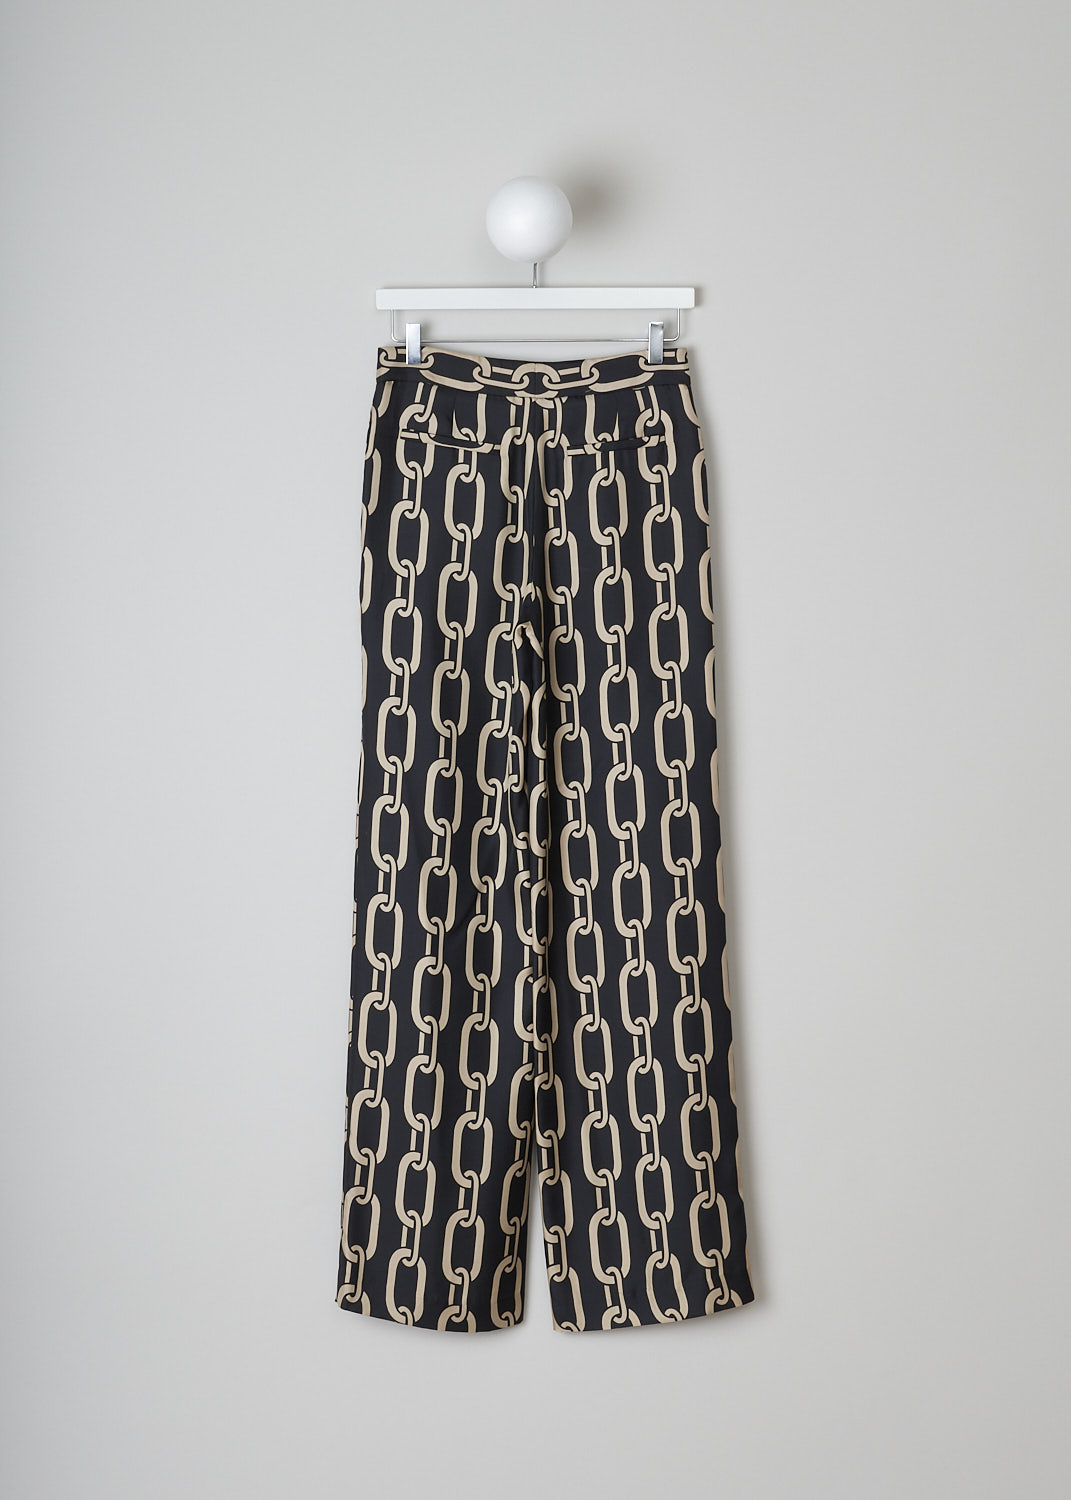 NILI LOTAN, SILK GERMAINE PANTS WITH CHAINLINK PRINT, 12206_W856, Black, Gold, Print, Back, These silk Germaine pants have a black base with an all-over chainlink print in gold. These pants have a button and concealed zip closure. Slated pockets are concealed in the side seams and welt pockets can be found in the back. These pants are high-waisted with straight pant legs. 
  
